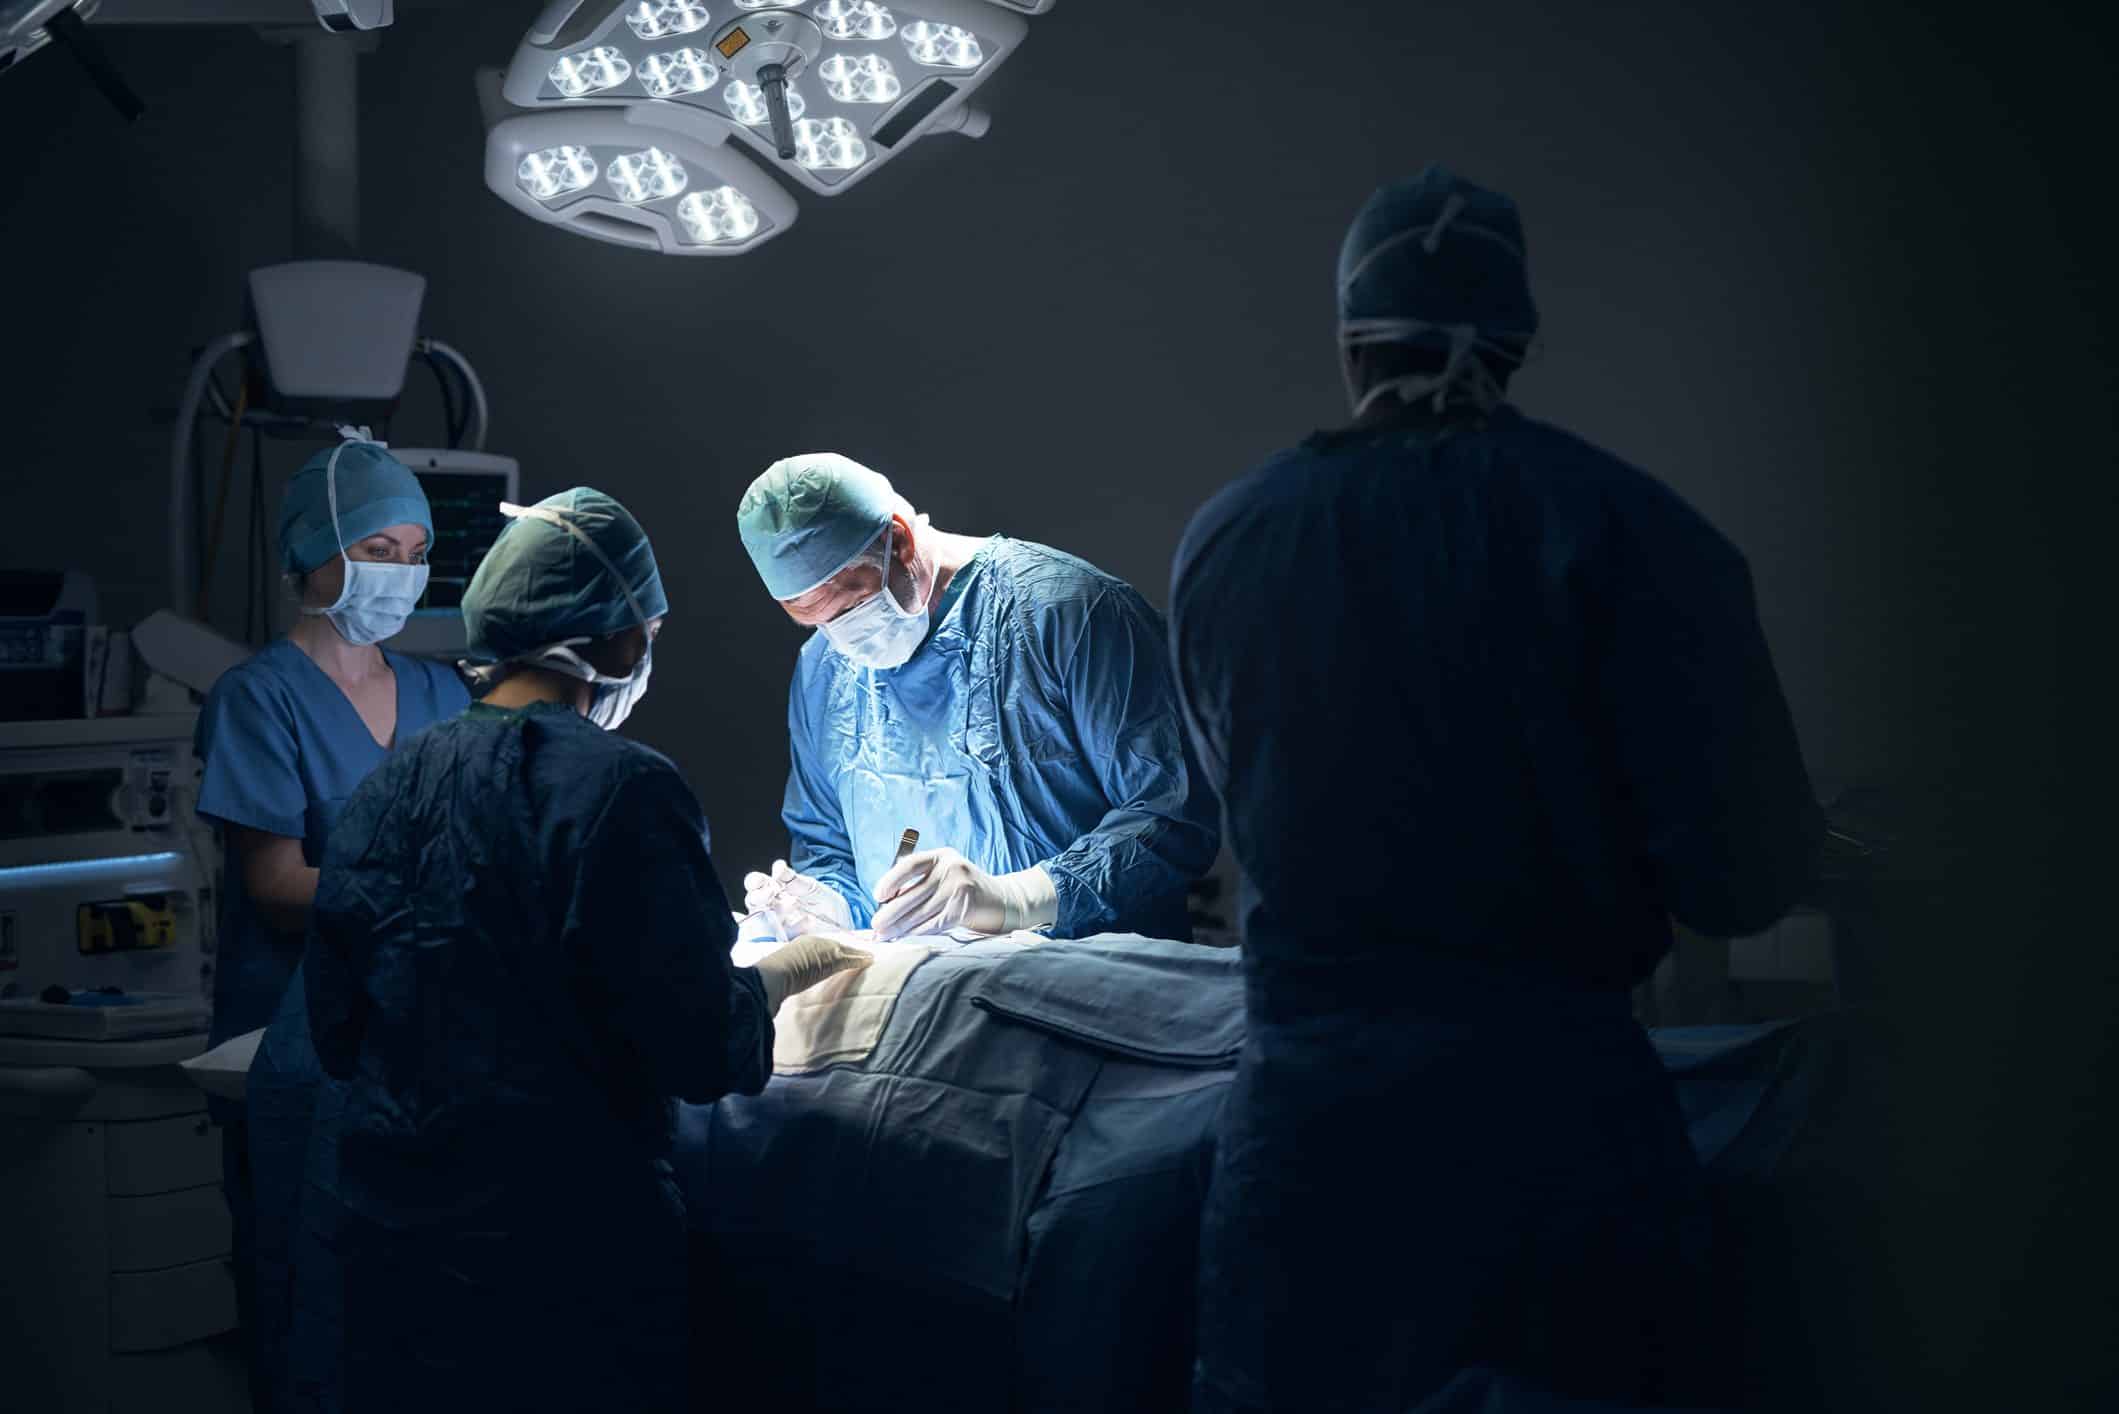 A worker undergoing surgery after an on-the-job injury.